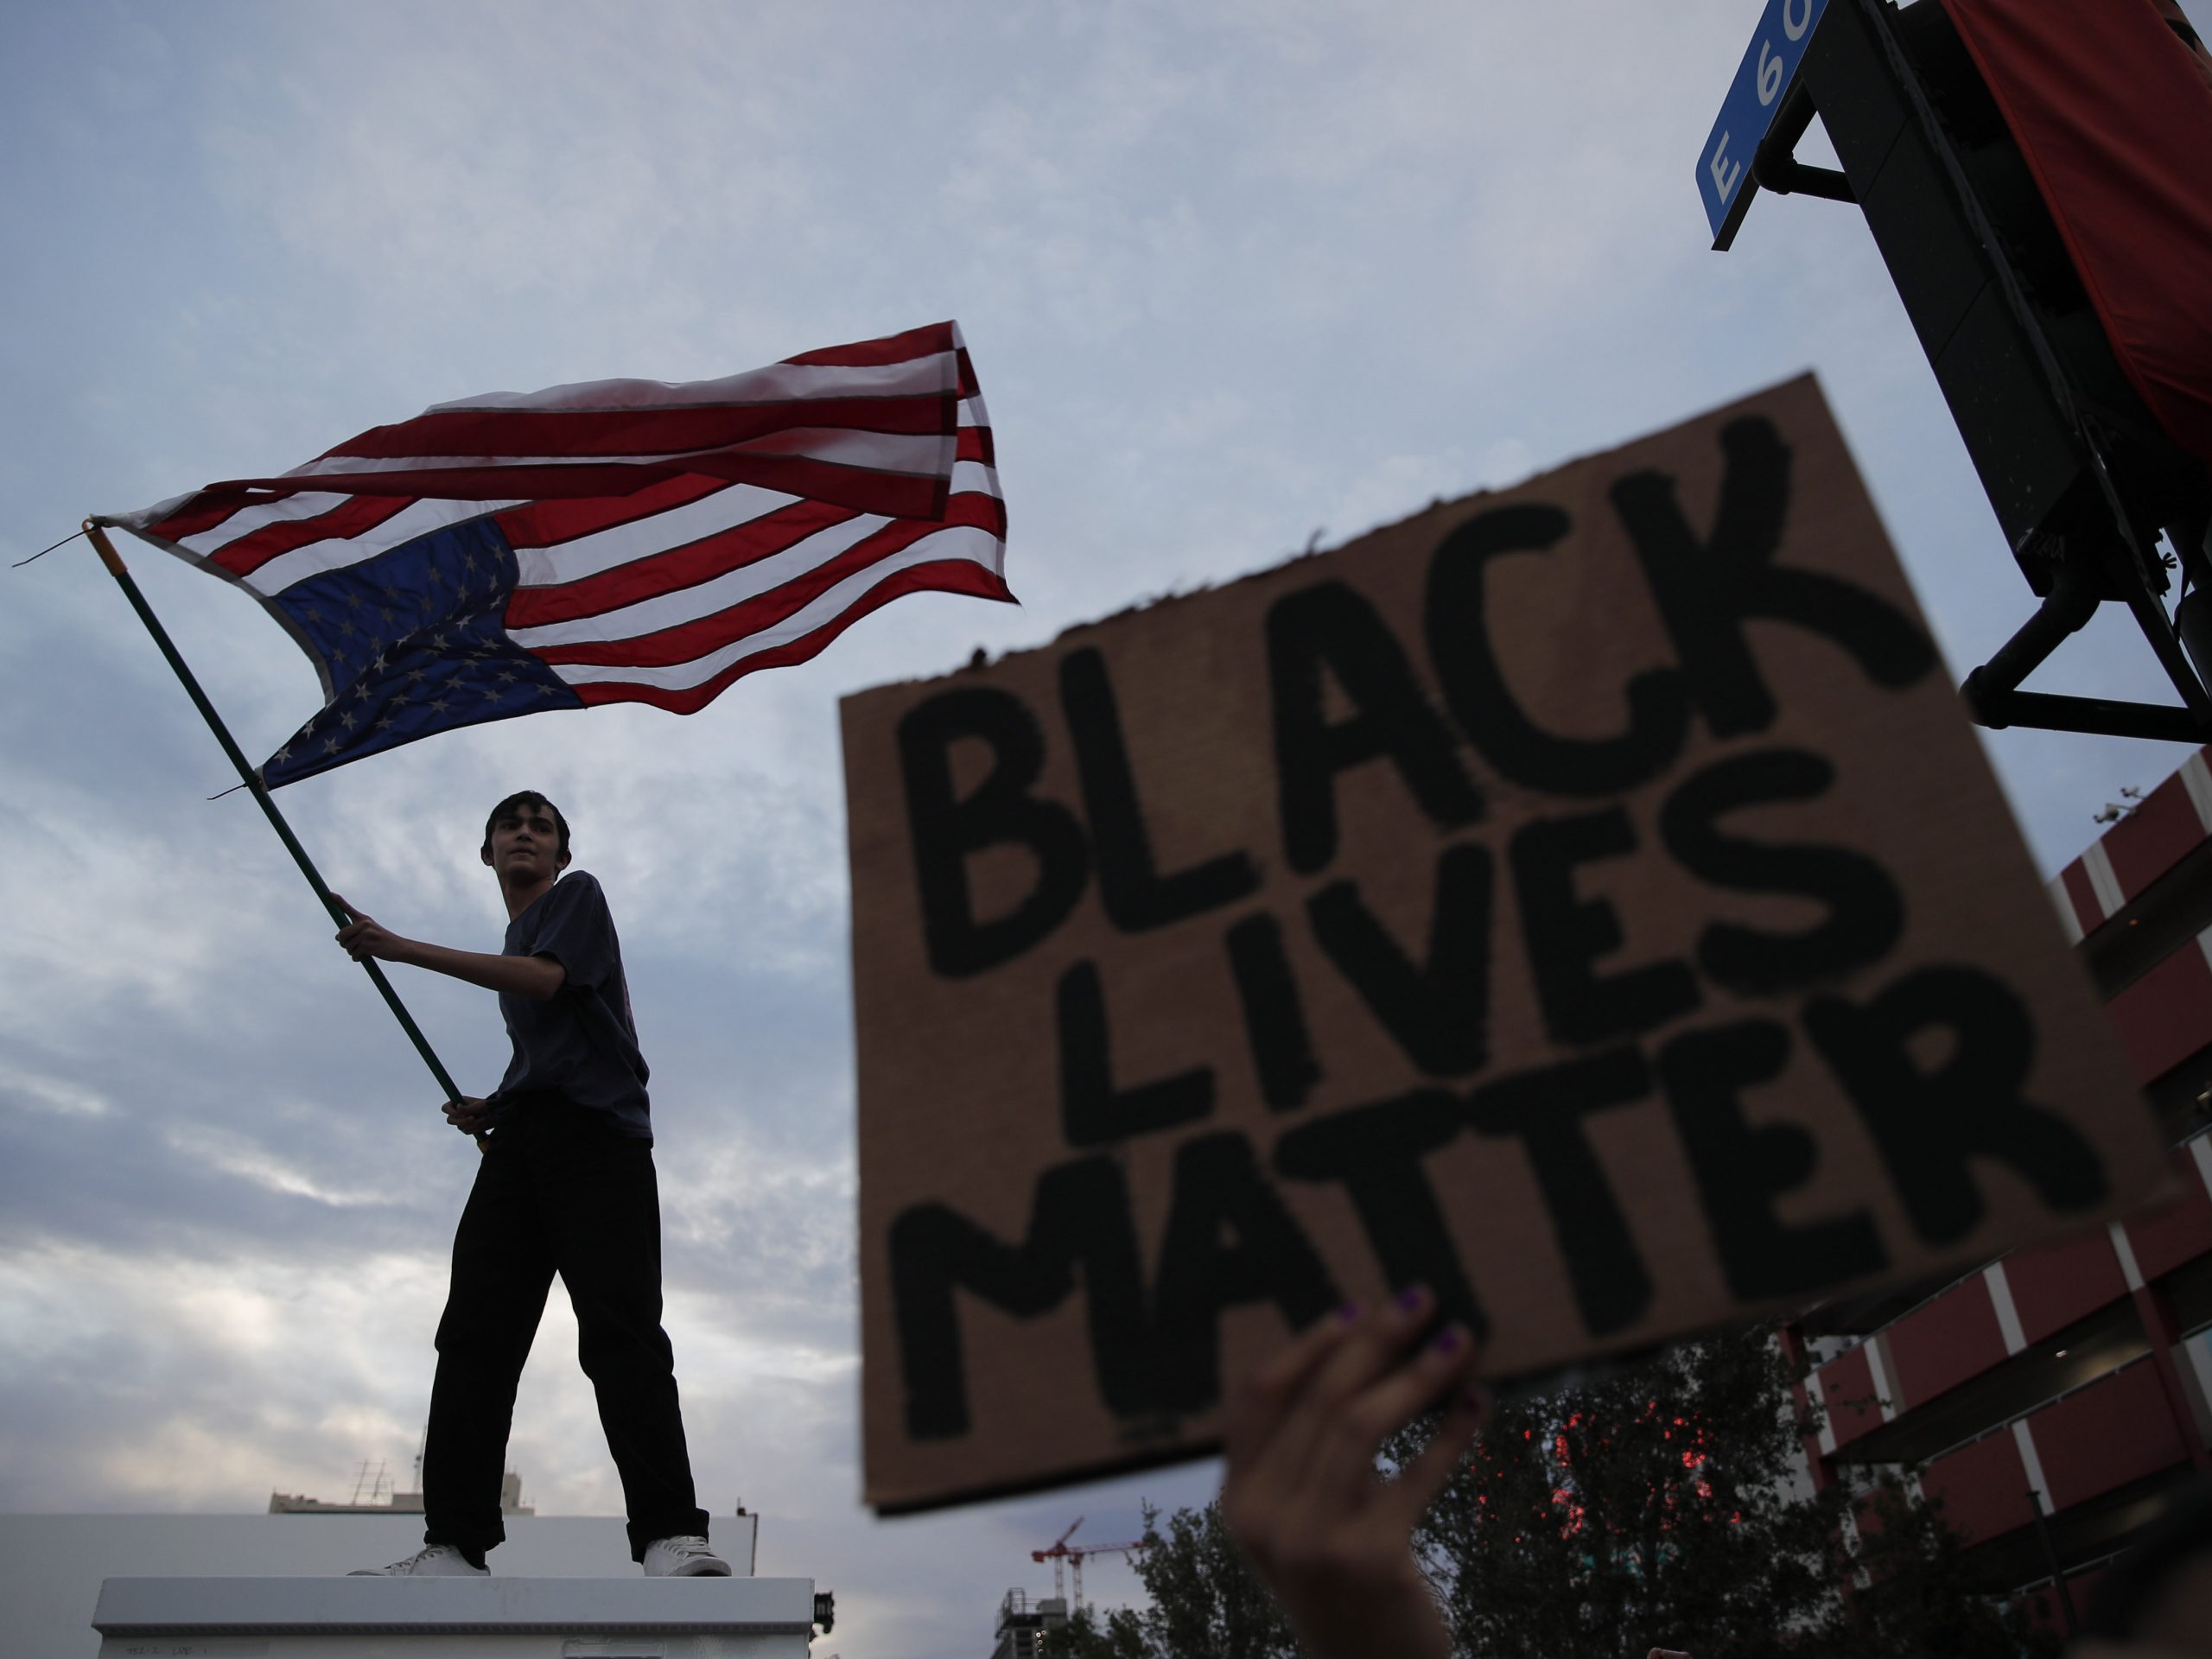 A man waves an upside-down American flag during a protest in Las Vegas following the death of George Floyd, a black man who died after a white Minneapolis police officer knelt on his neck.